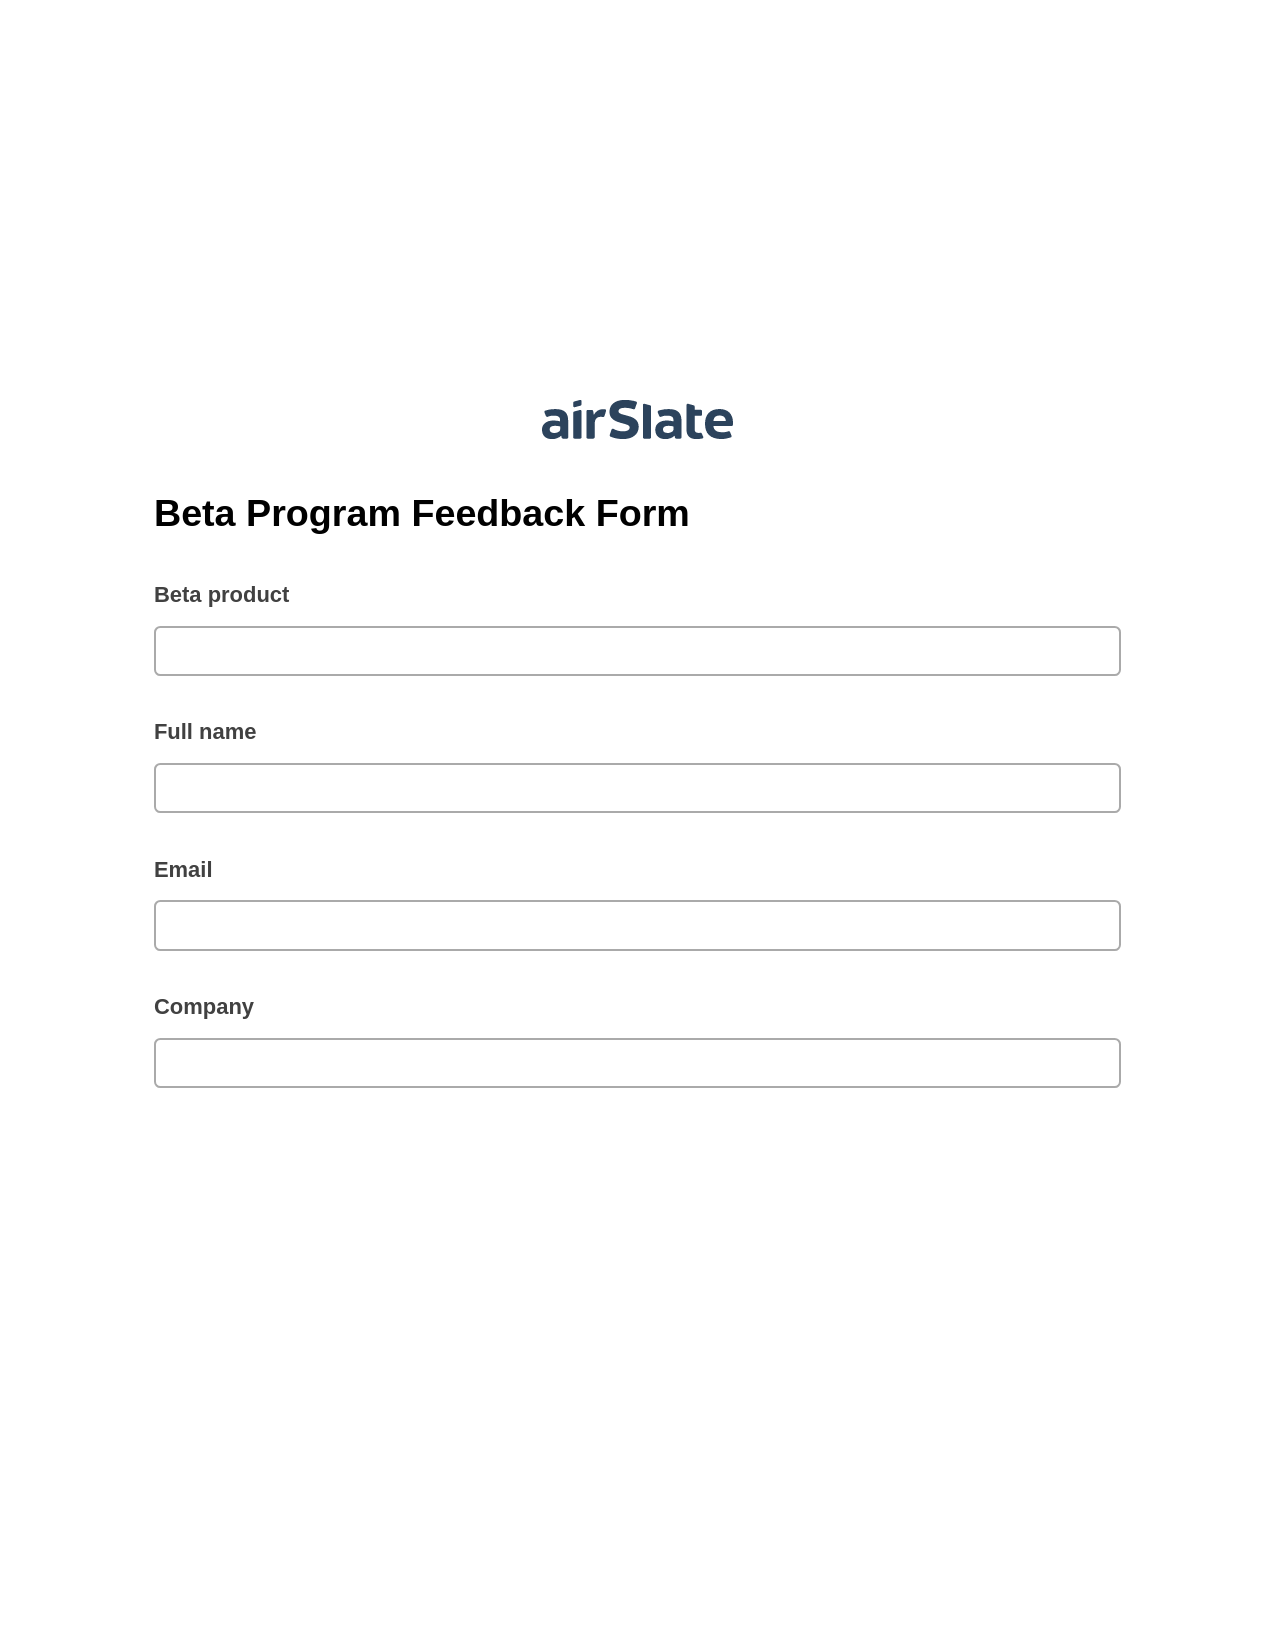 Multirole Beta Program Feedback Form Pre-fill Slate from MS Dynamics 365 Records Bot, Webhook Bot, Export to Excel 365 Bot